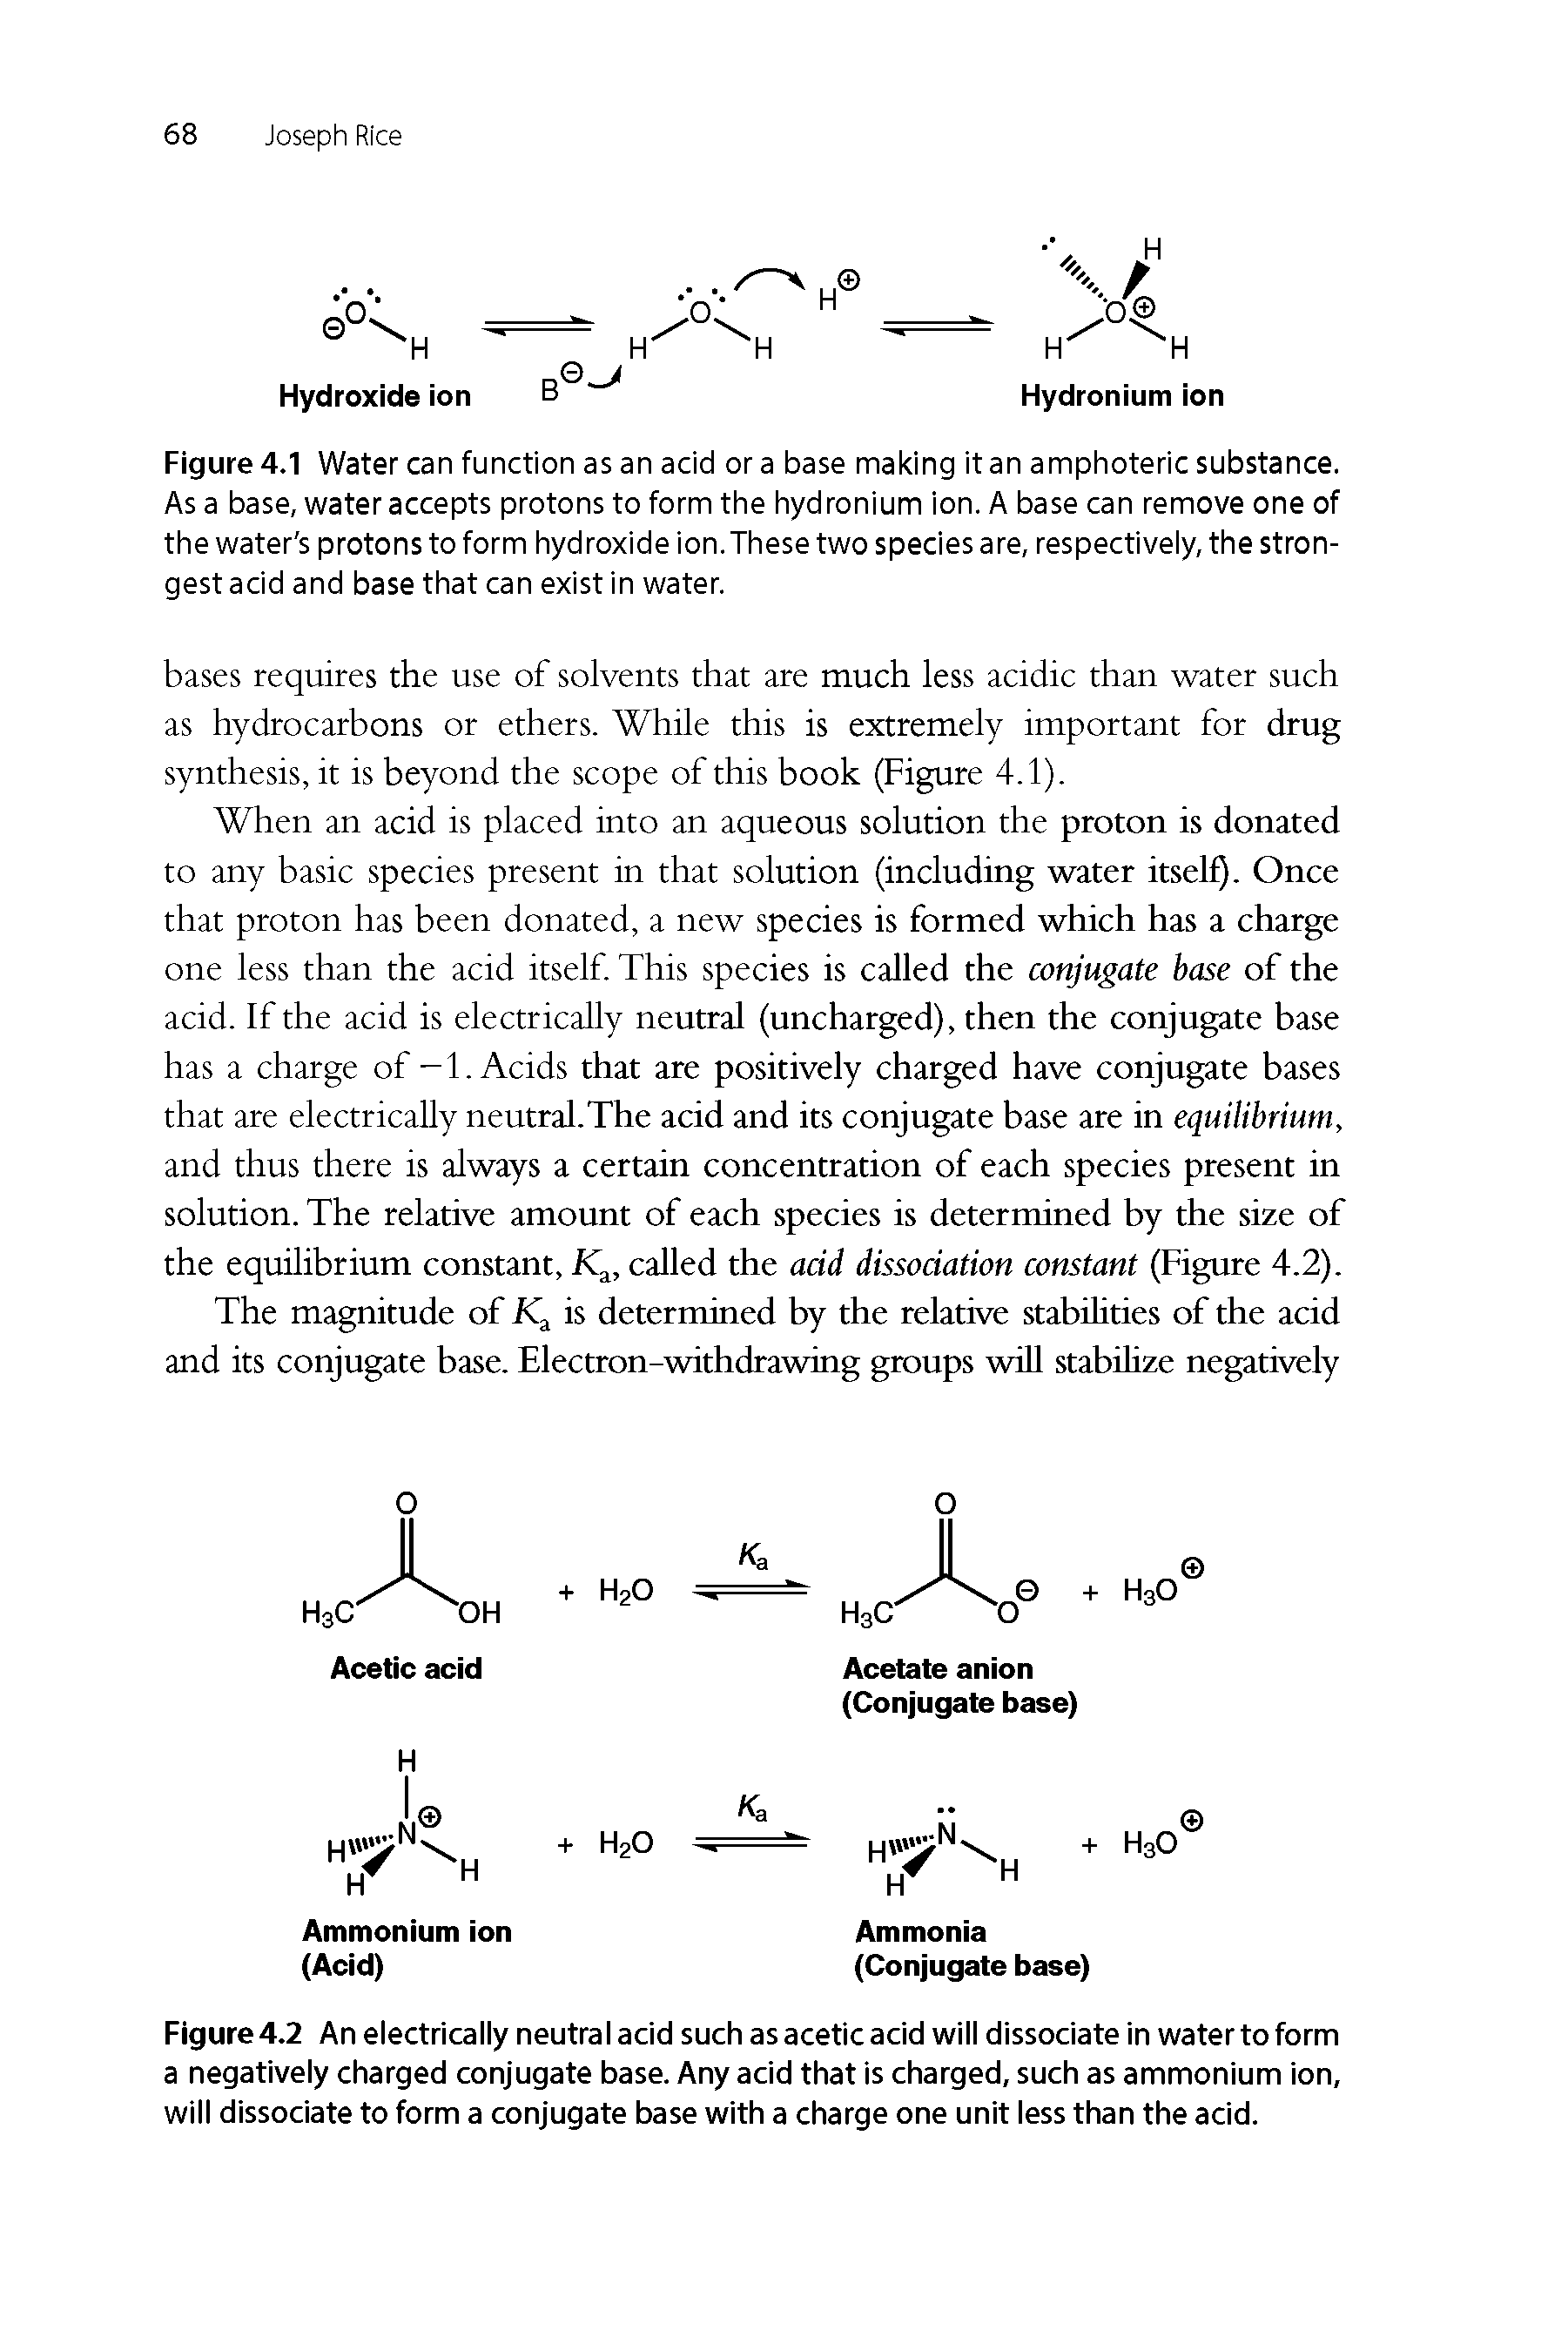 Figure4.2 An electrically neutral acid such as acetic acid will dissociate in water to form a negatively charged conjugate base. Any acid that is charged, such as ammonium ion, will dissociate to form a conjugate base with a charge one unit less than the acid.